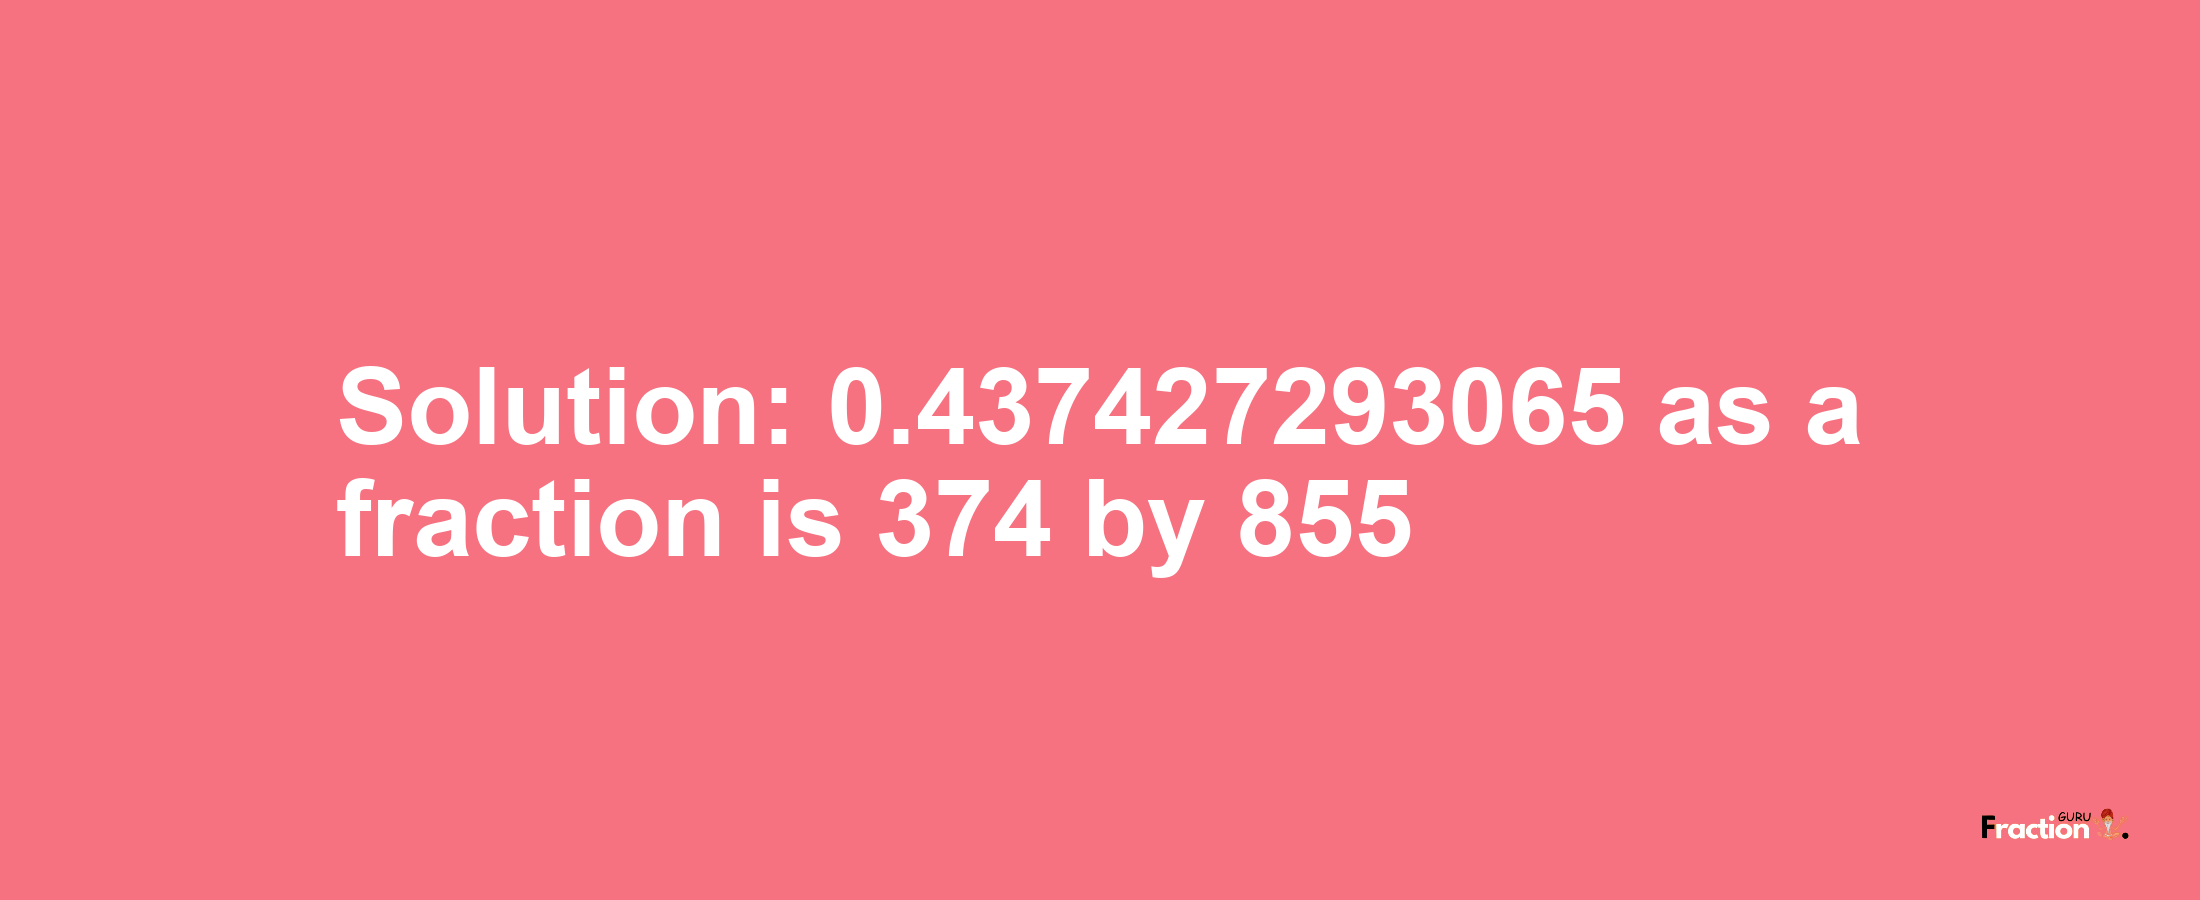 Solution:0.437427293065 as a fraction is 374/855